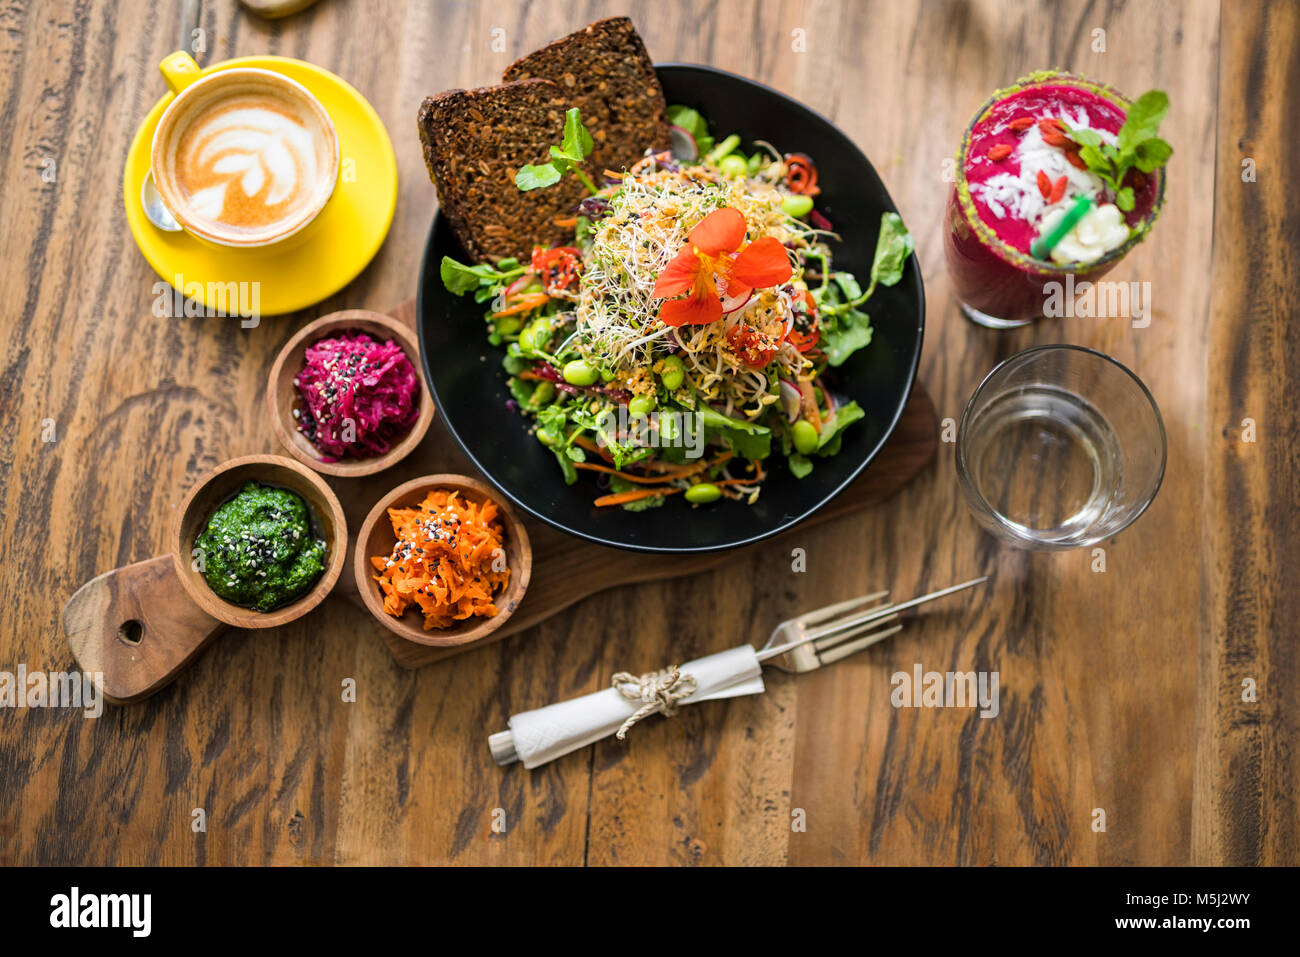 Decorated colorful salad on wooden plate with coffee, water and smoothie on the side Stock Photo